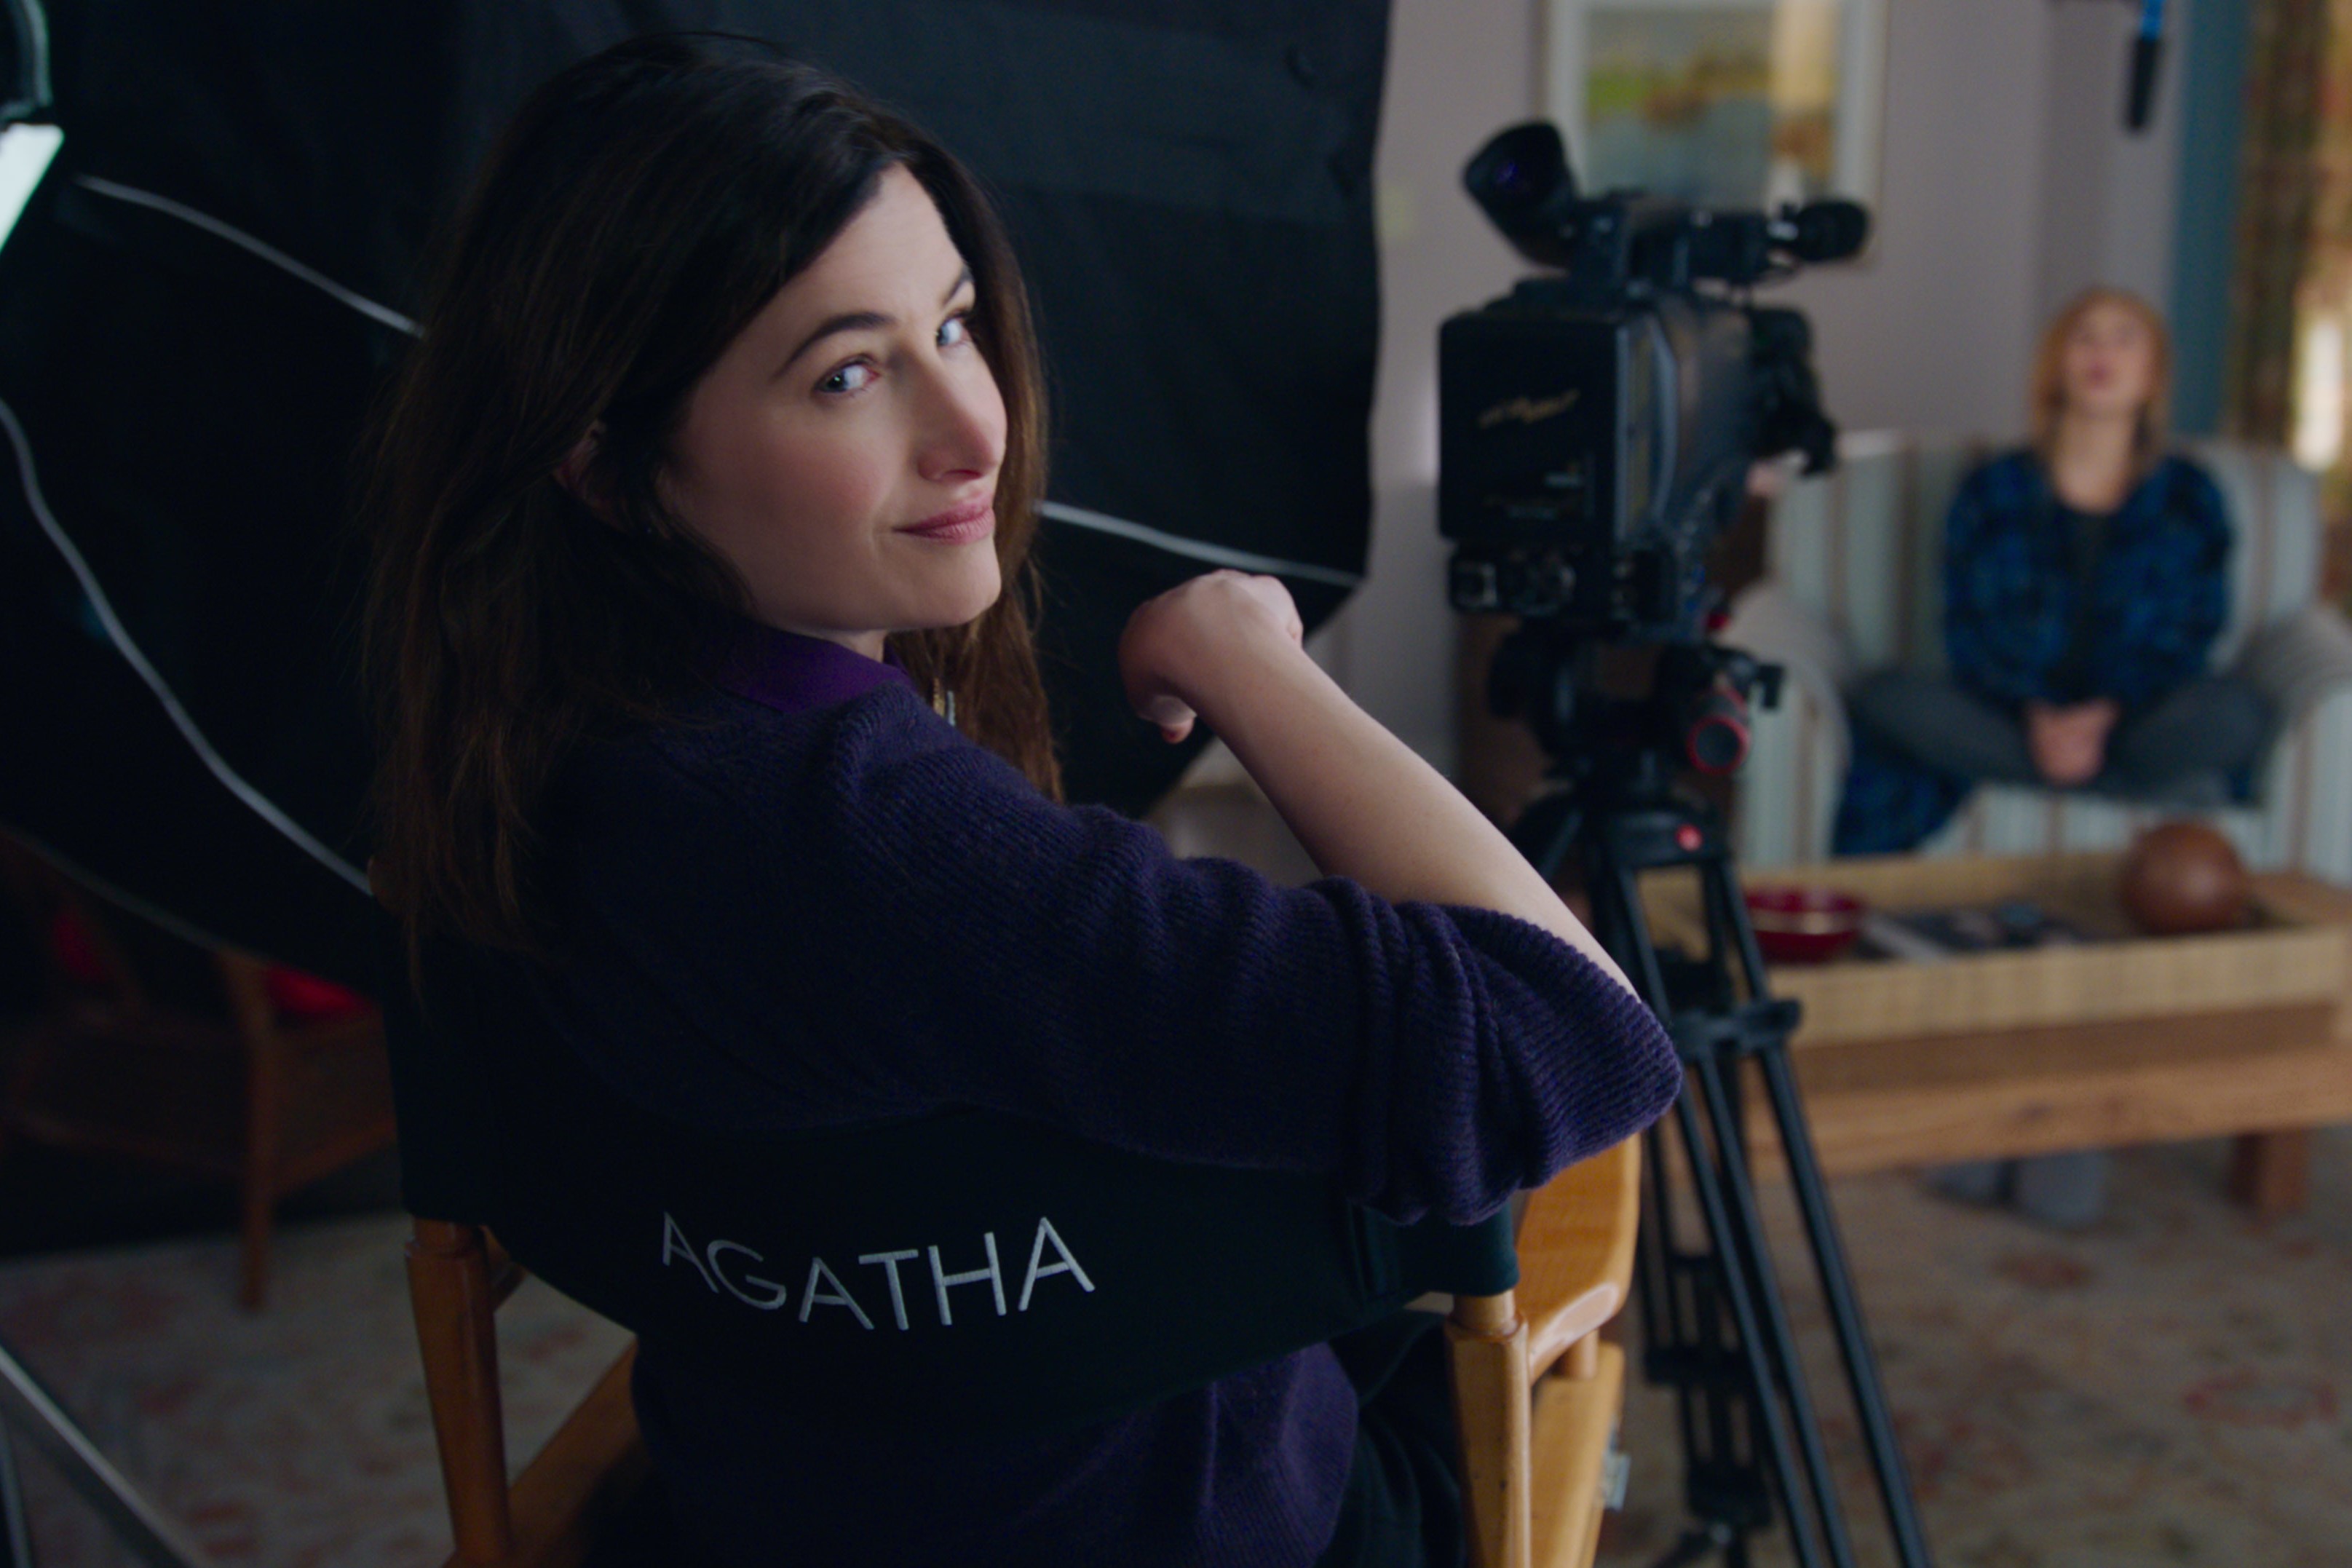 Kathryn Hahn, in character as Agatha Harkness, who fans want to see in 'Doctor Strange 2' after seeing the trailer, wears a purple sweater and sits in a director's chair that reads "Agatha" on the back. Agatha sits behind a camera that records Wanda in the background.